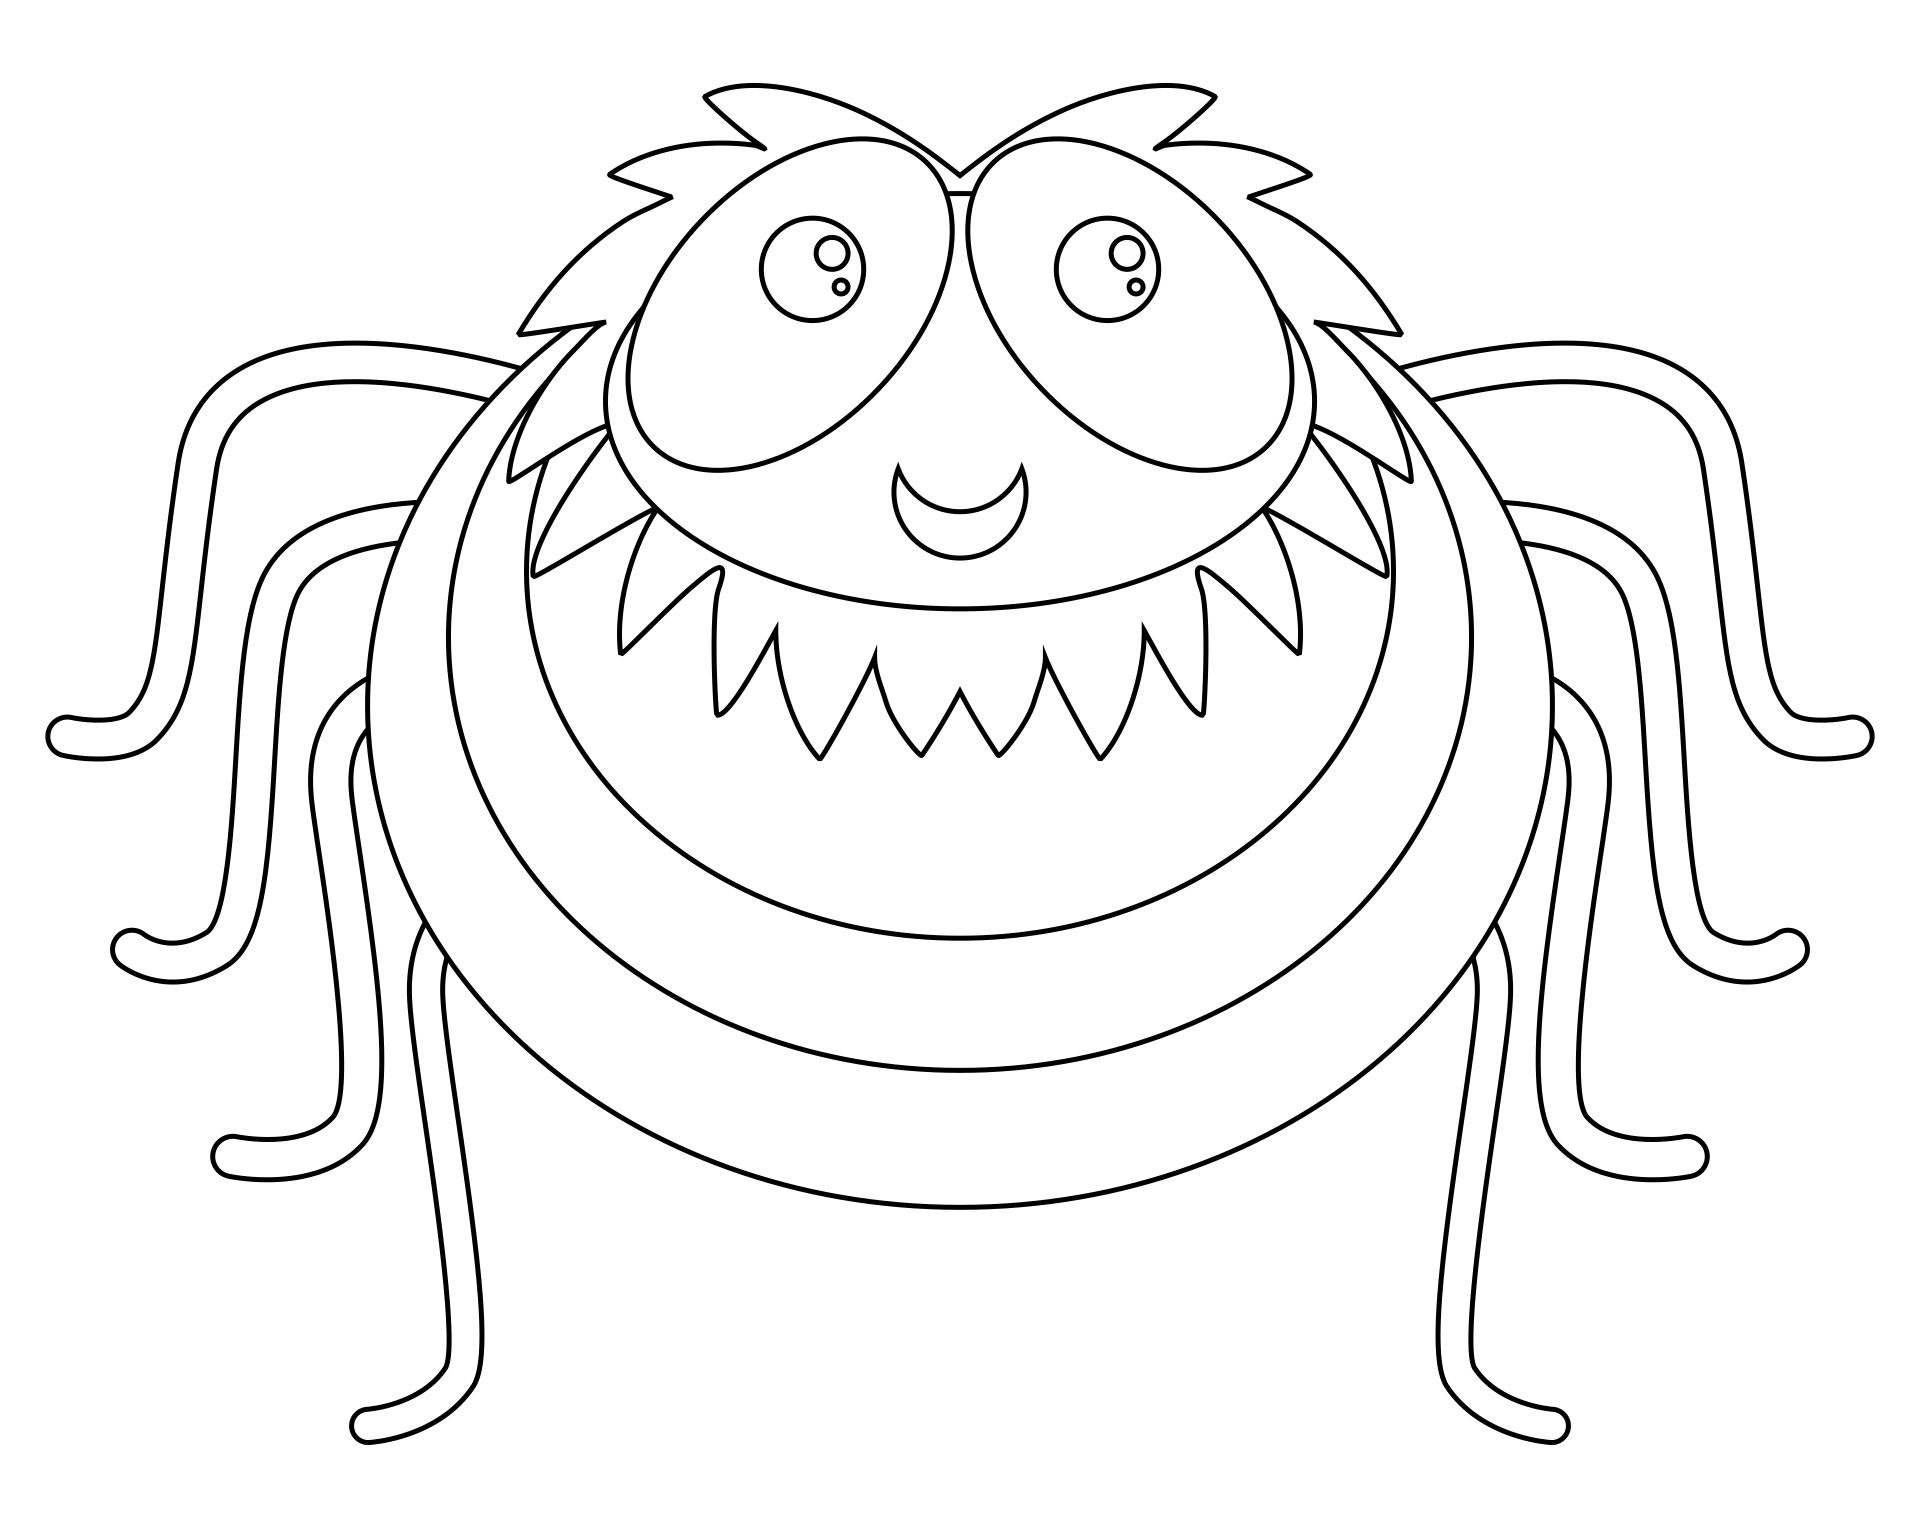 15-best-halloween-spider-coloring-pages-printable-pdf-for-free-at-printablee